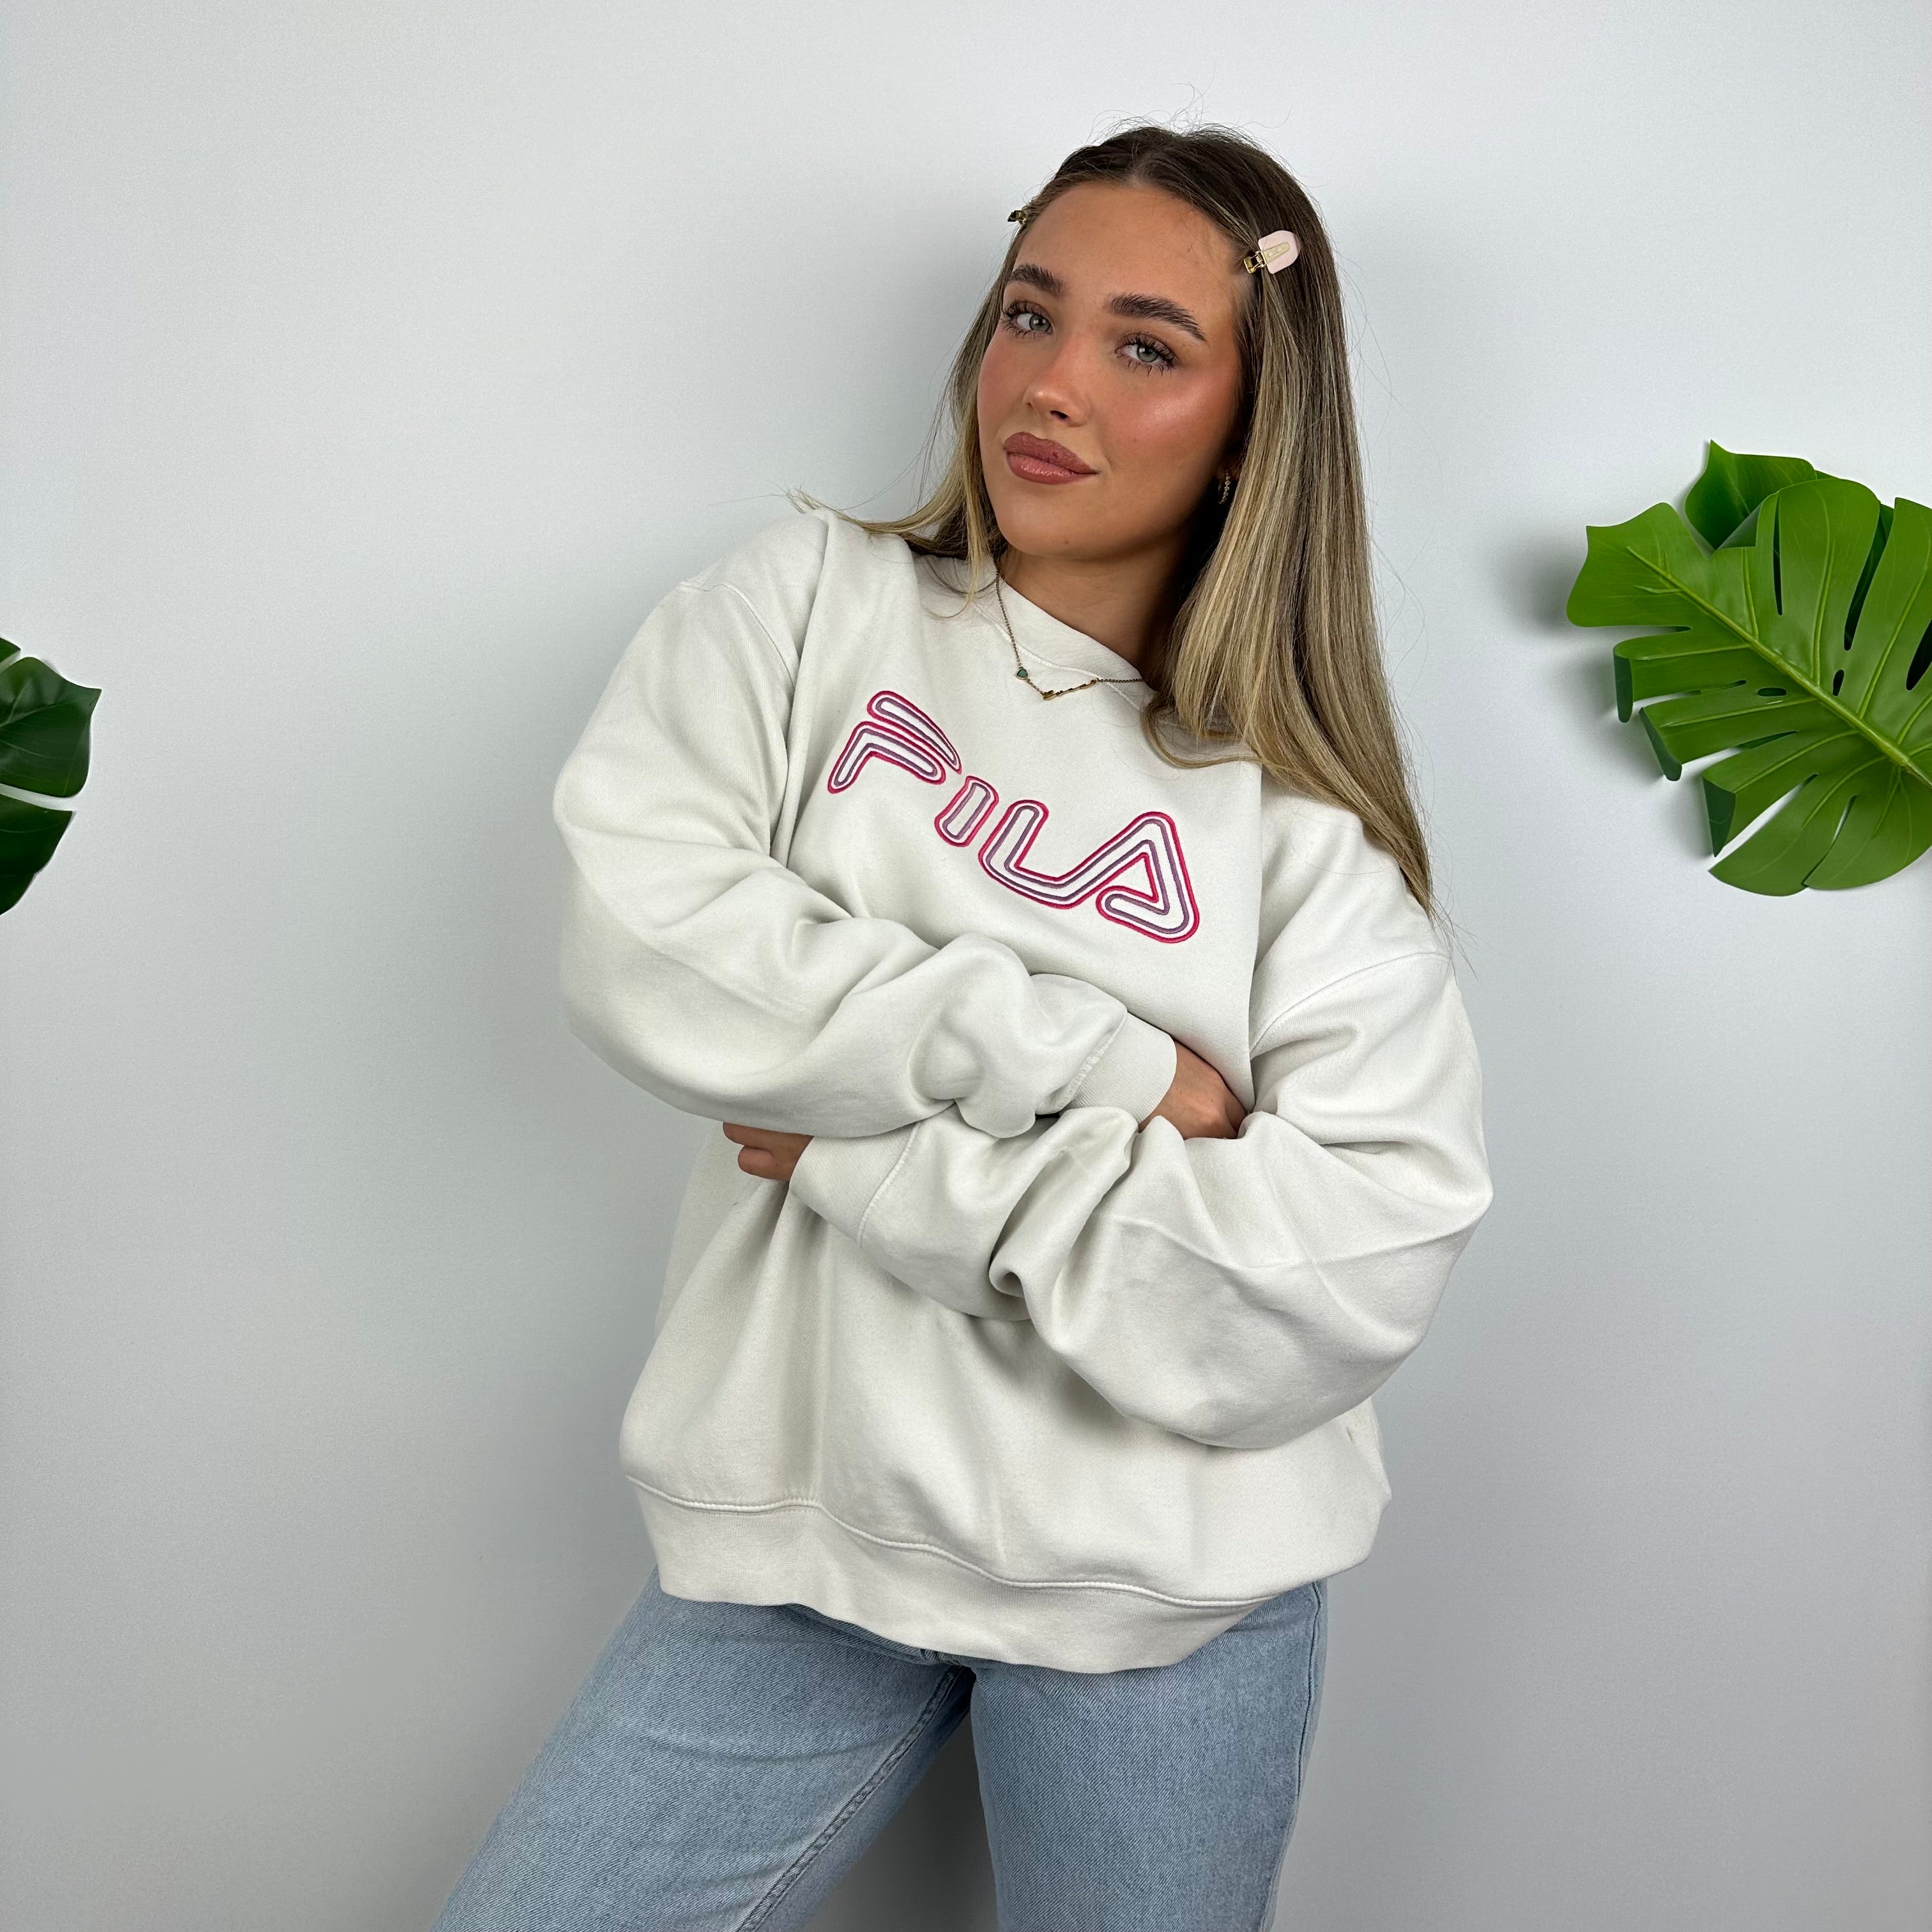 FILA RARE White Embroidered Spell Out Sweatshirt (XL)